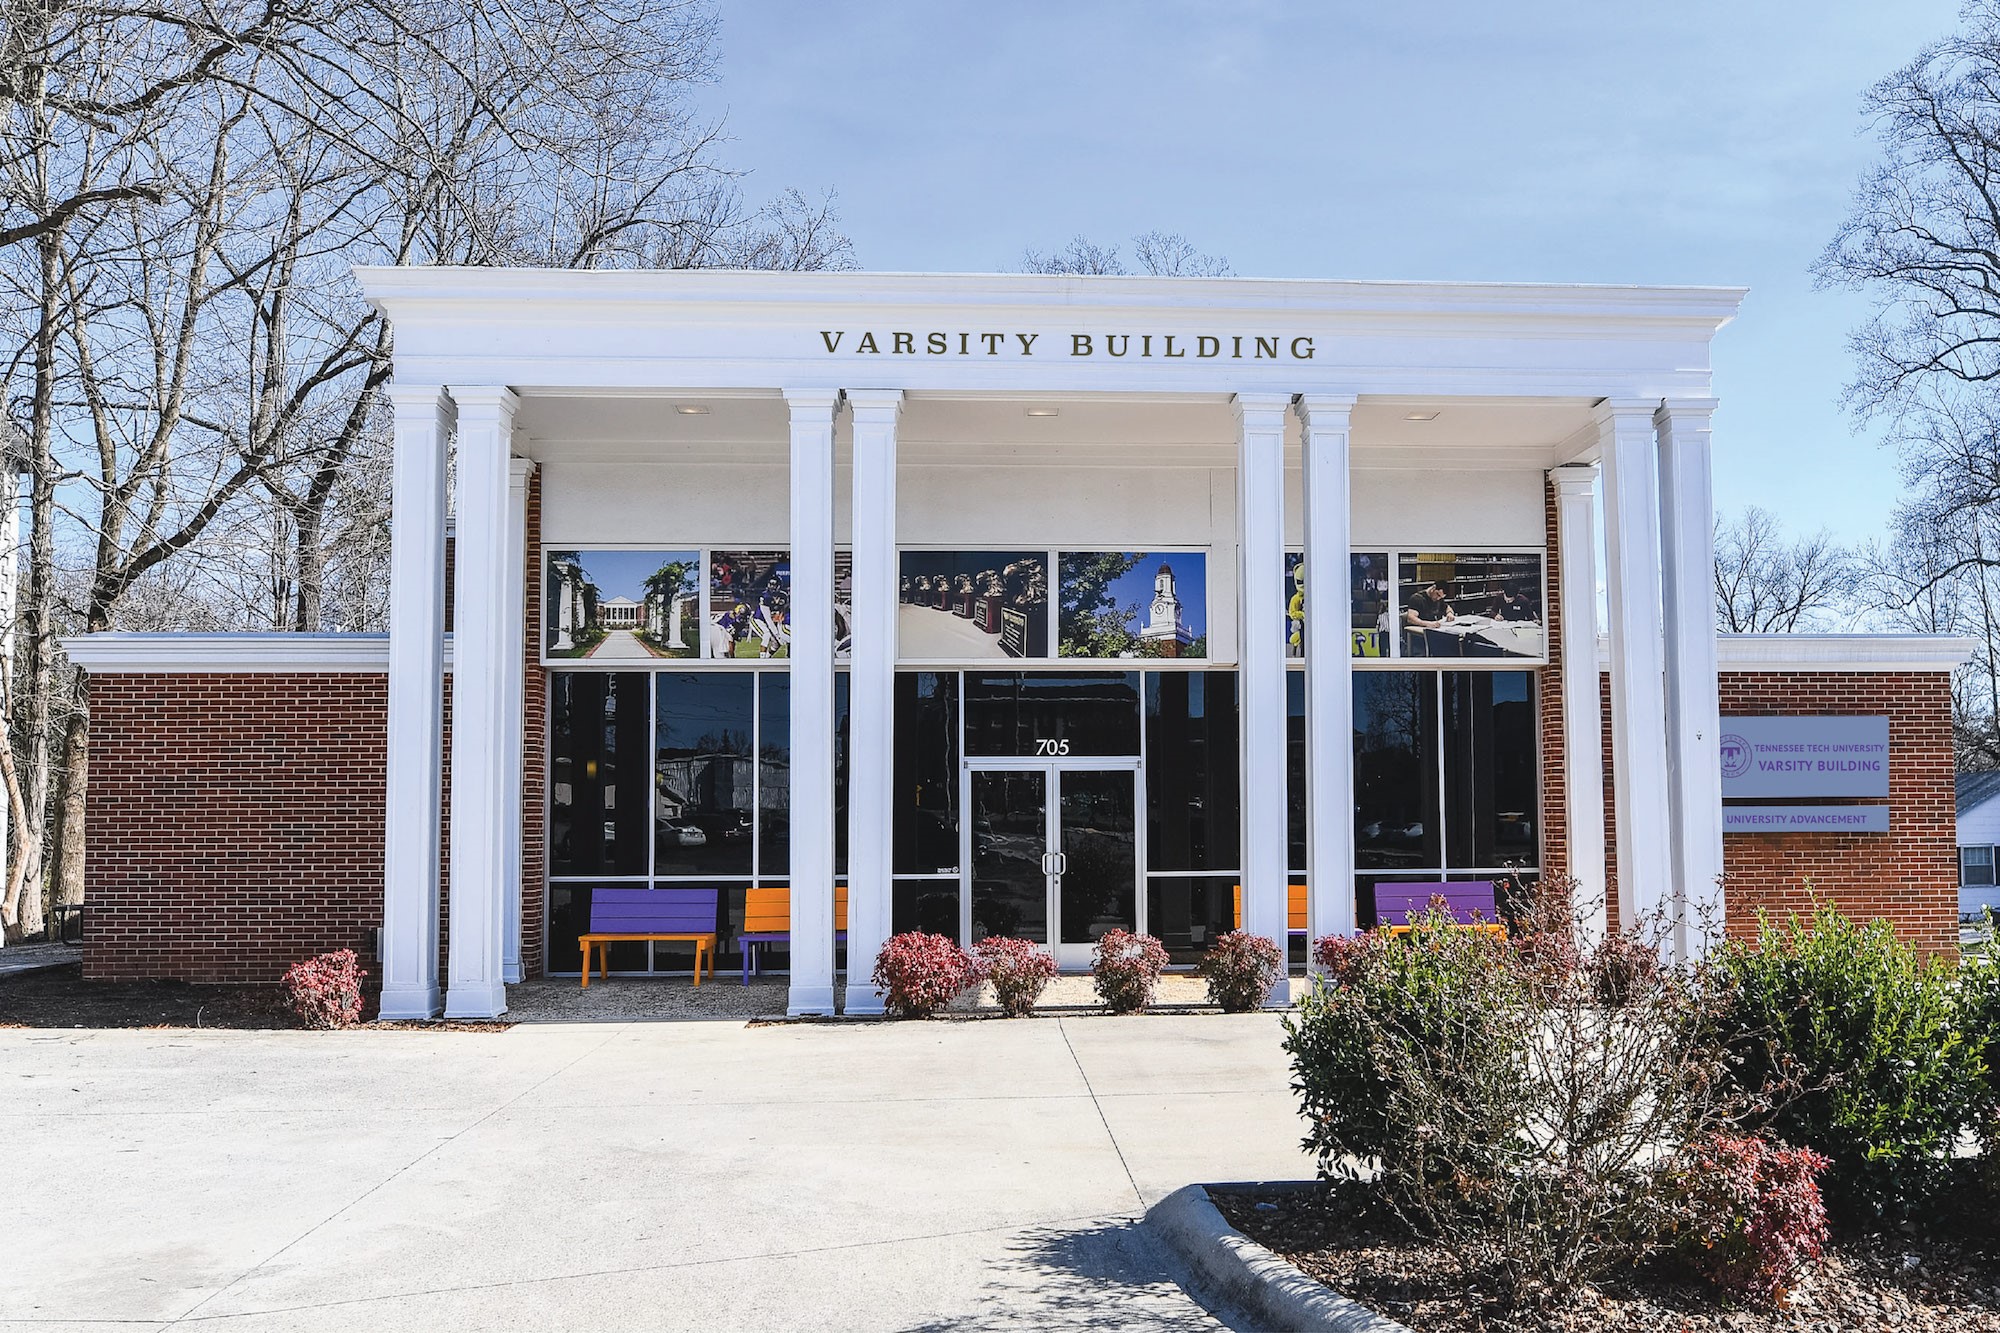 The building once known as the Varsity Cinema Theatre recently celebrated its 50th anniversary, and on Sept. 24, the Tennessee Tech University Board of Trustees voted to rename it the Varsity Building.  